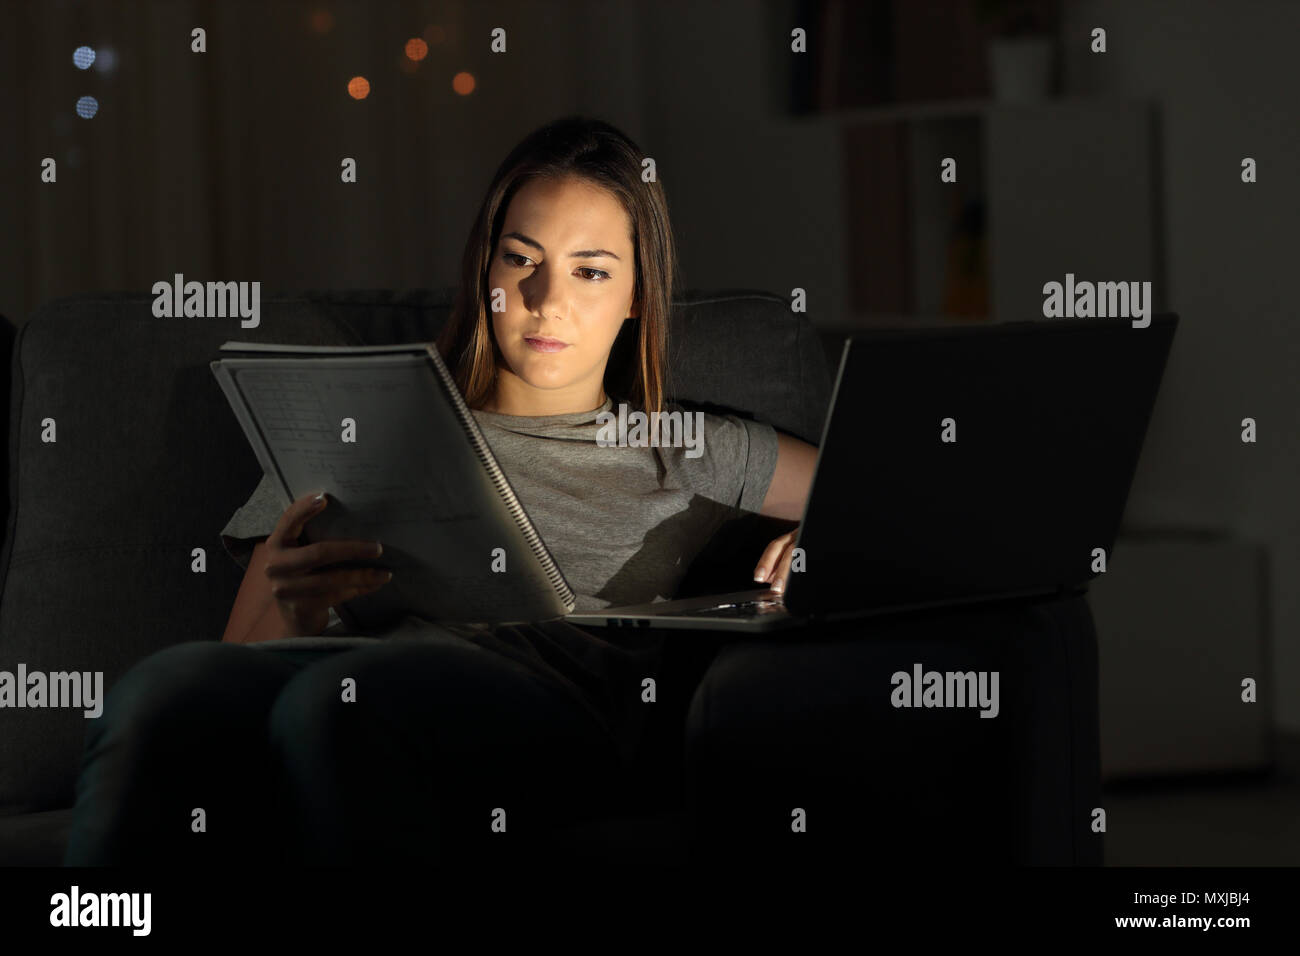 Studious student studying online late hours in the night at home Stock Photo